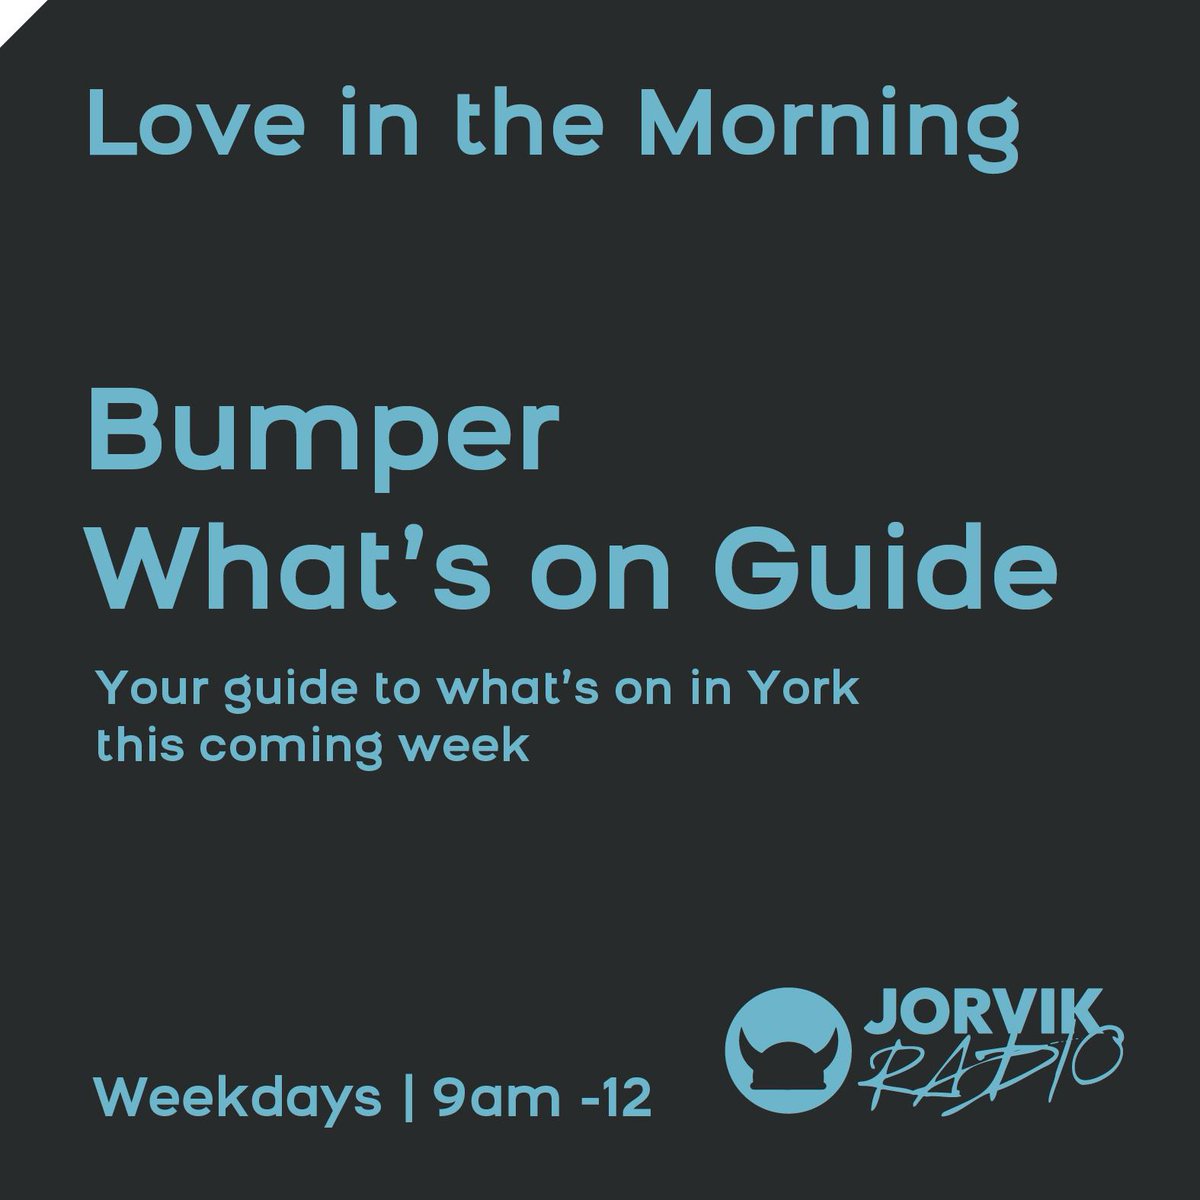 Your indispensable guide to all the great things to see and do across the York area over the coming Bank Holiday weekend - covered on the Bumper What's On Guide this morning from 11.20am... Tune in on 94.8FM & jorvikradio.com/player/